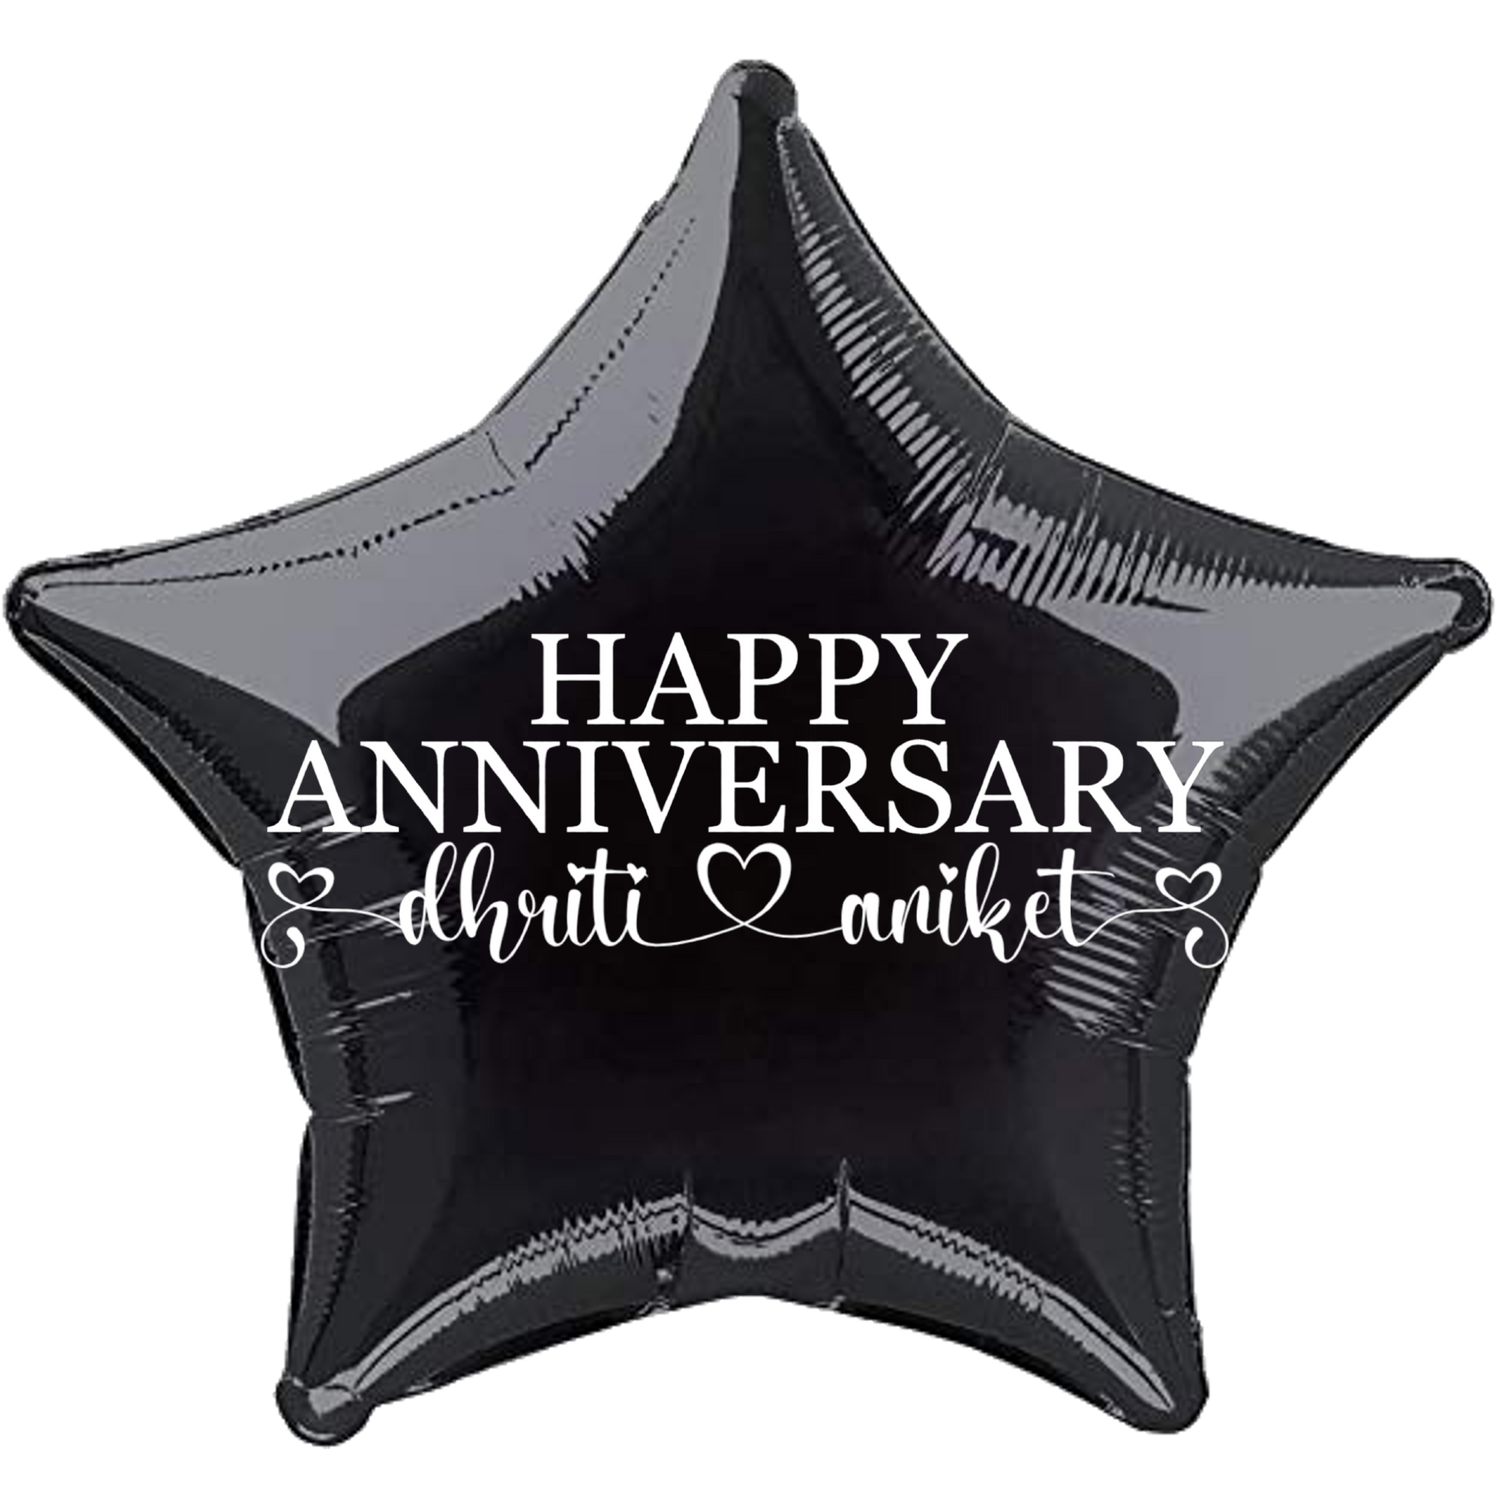 Custom Name/Text/Message Black Star Balloons For First Wedding Anniversary, 2nd/3rd/5th/10th/15th/20th/25th/30th/35th/40th/45th/50th/55th/60th/65th/75th Marriage Anniversary And Wedding Milestones. Supports Helium/Air, Luxury Bespoke Balloons Make Perfect Decoration Supplies & Surprise For Your Husband/Wife/Partner/Other-Half.